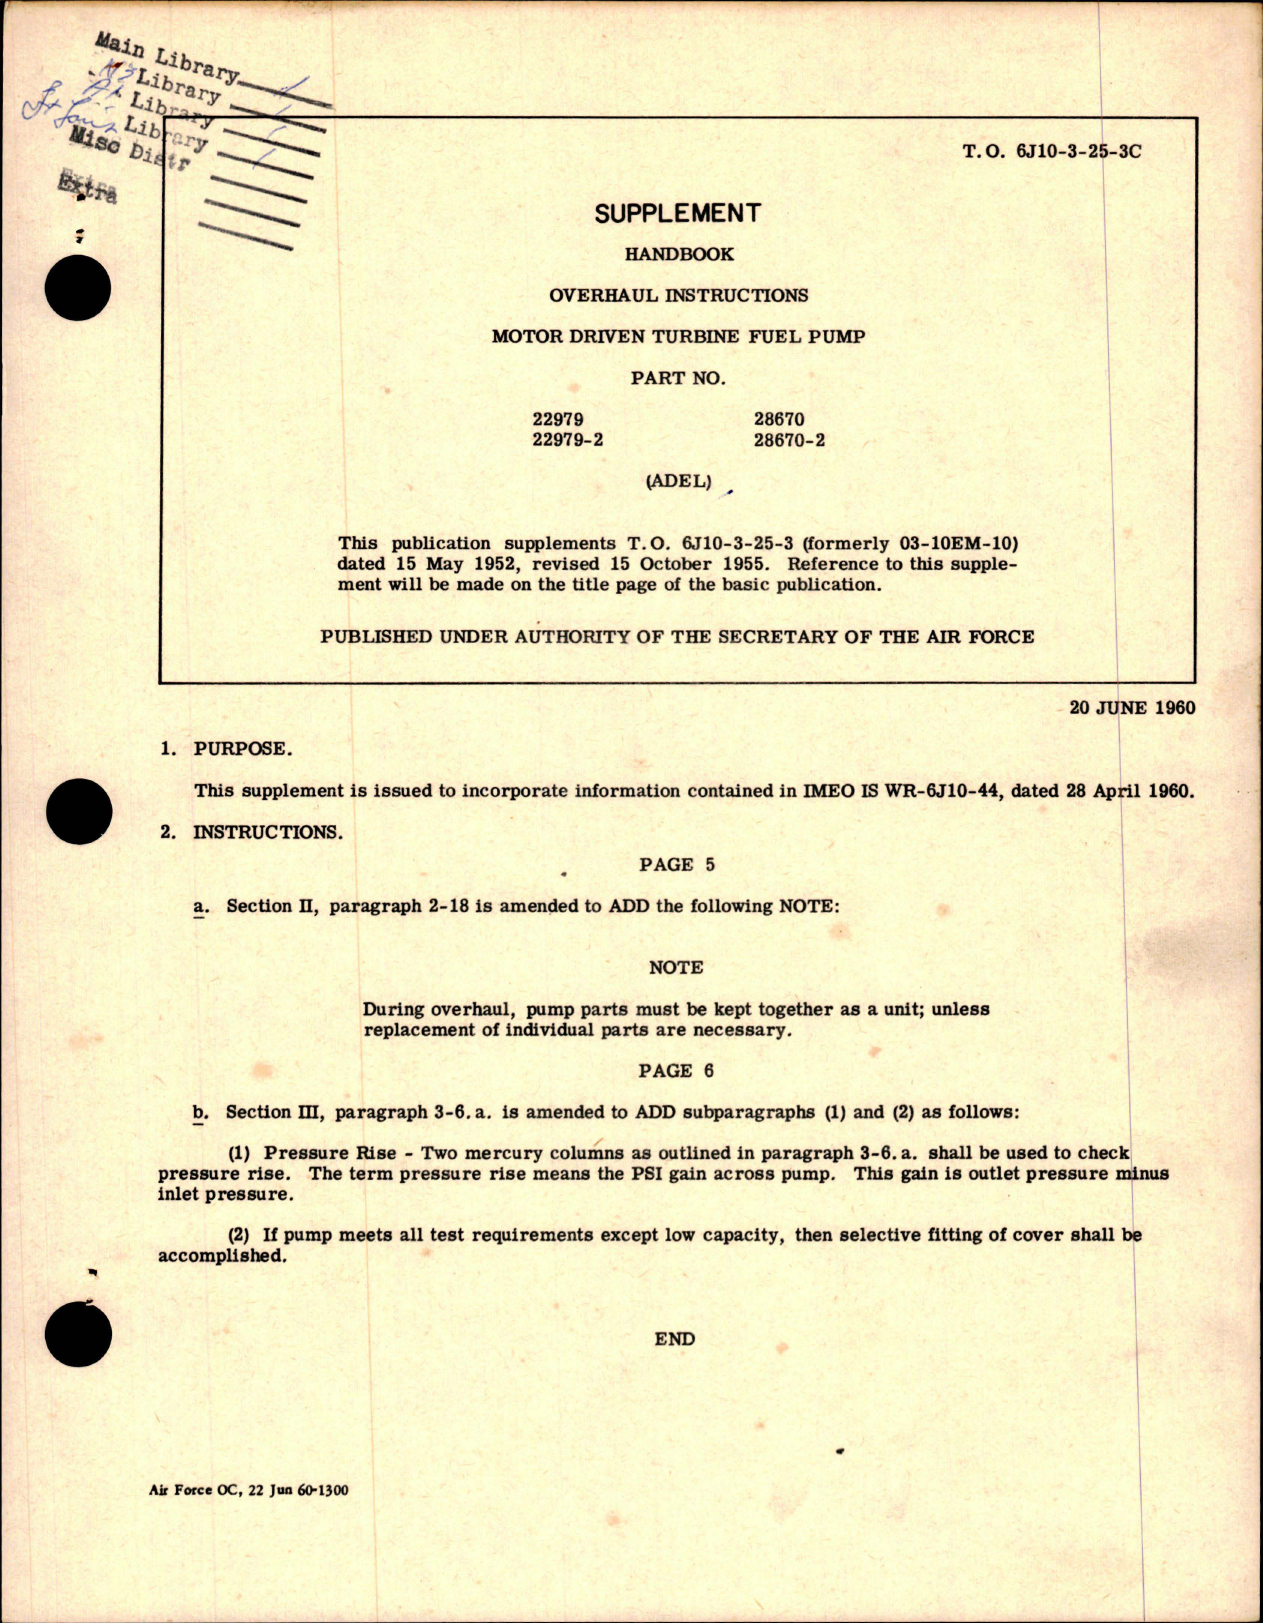 Sample page 1 from AirCorps Library document: Supplement to Overhaul Instructions for Motor Driven Turbine Fuel Pump 